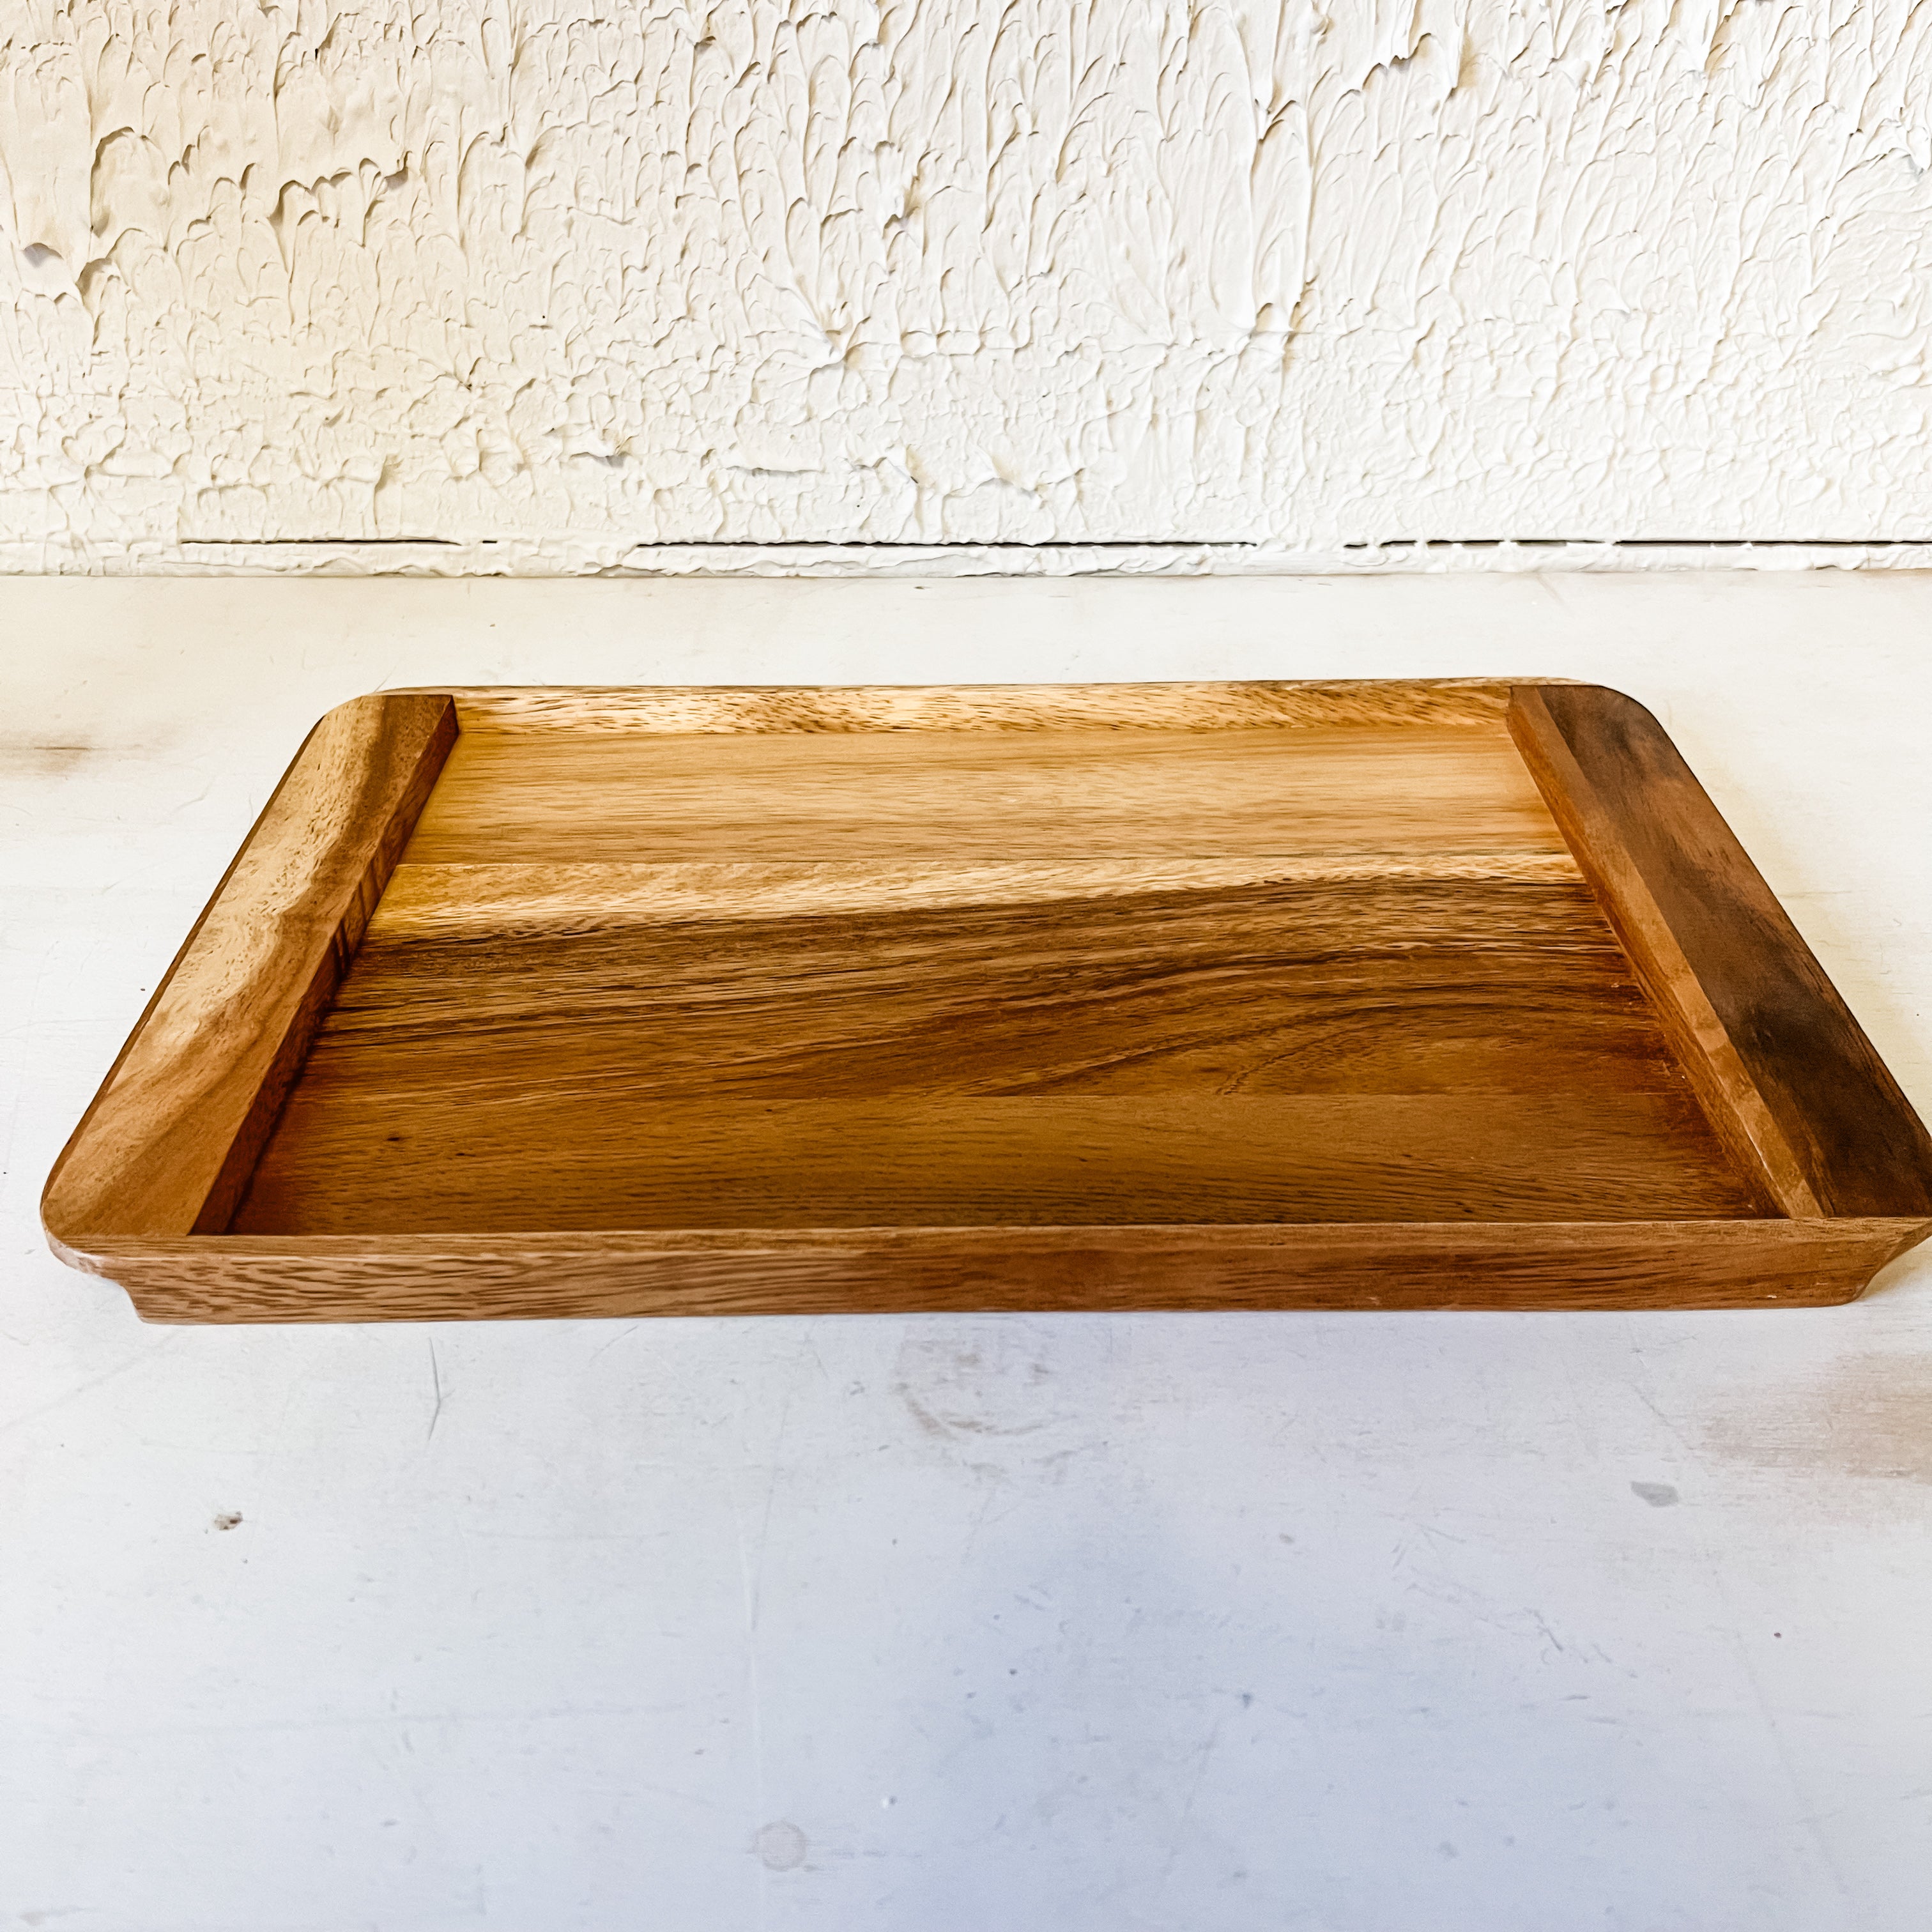 Suar Wood Tray With Handles